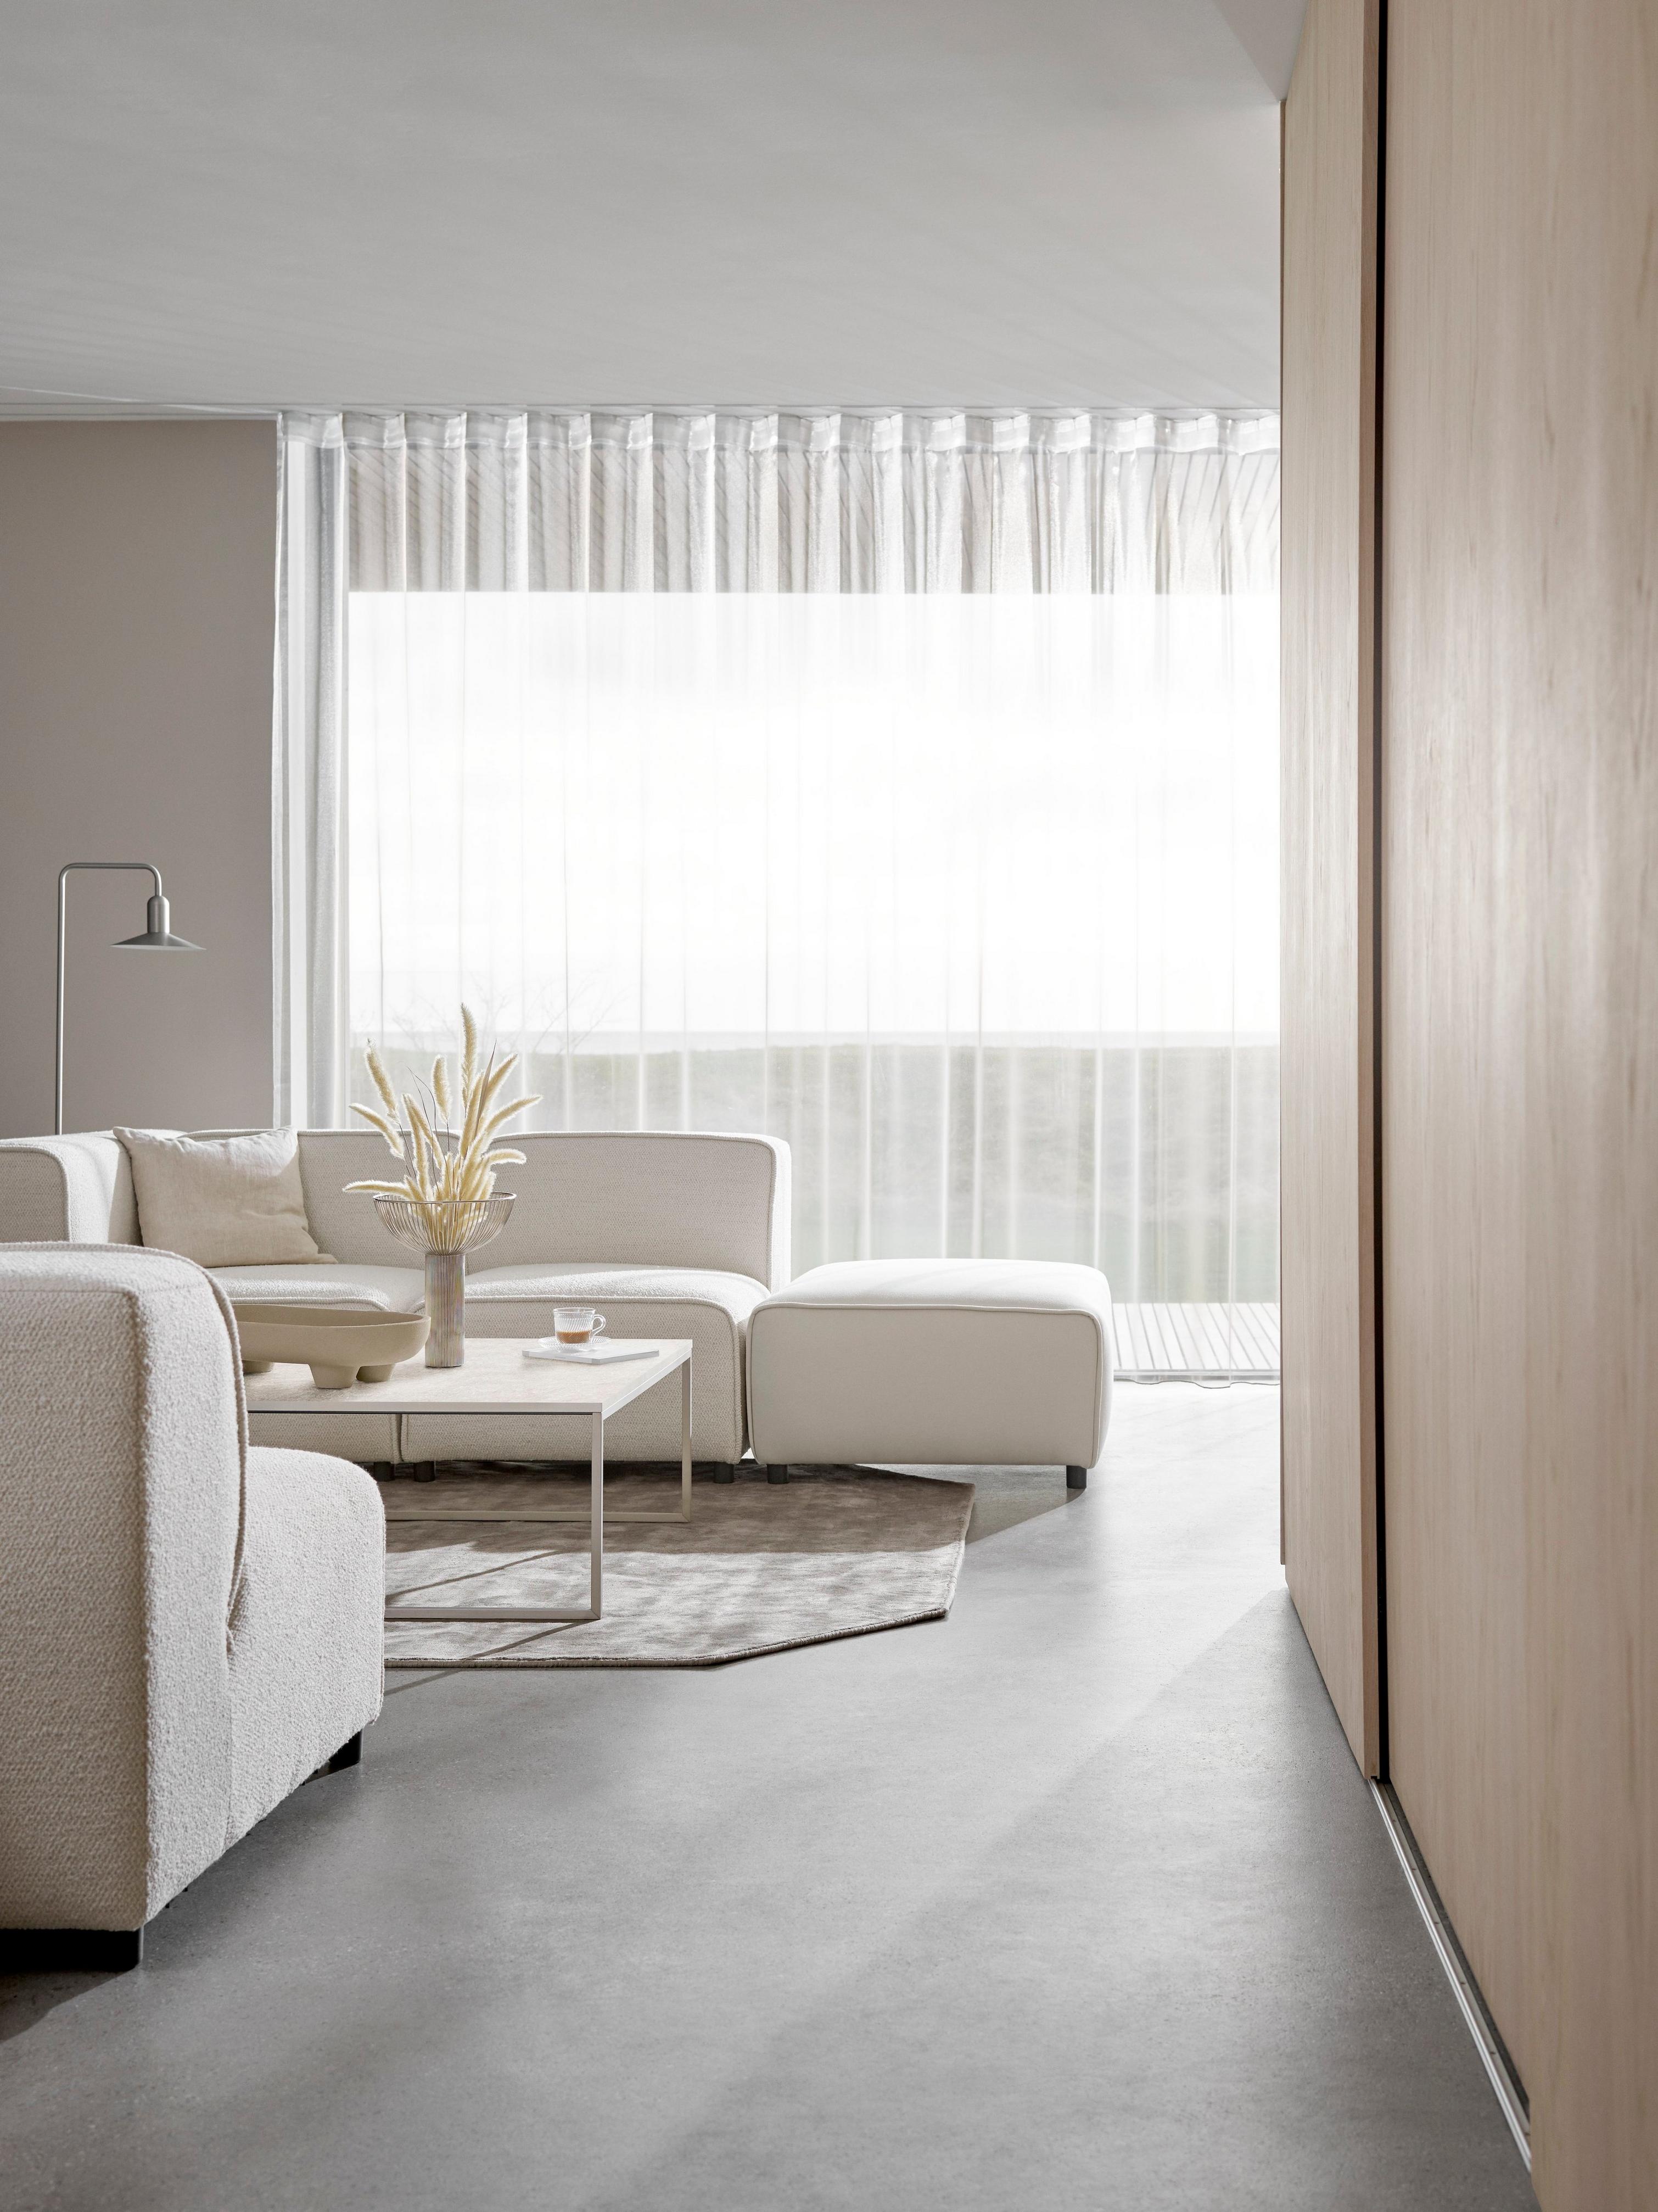 Cream-colored Carmo sofa in a minimalist living room, sheer curtains diffusing light.